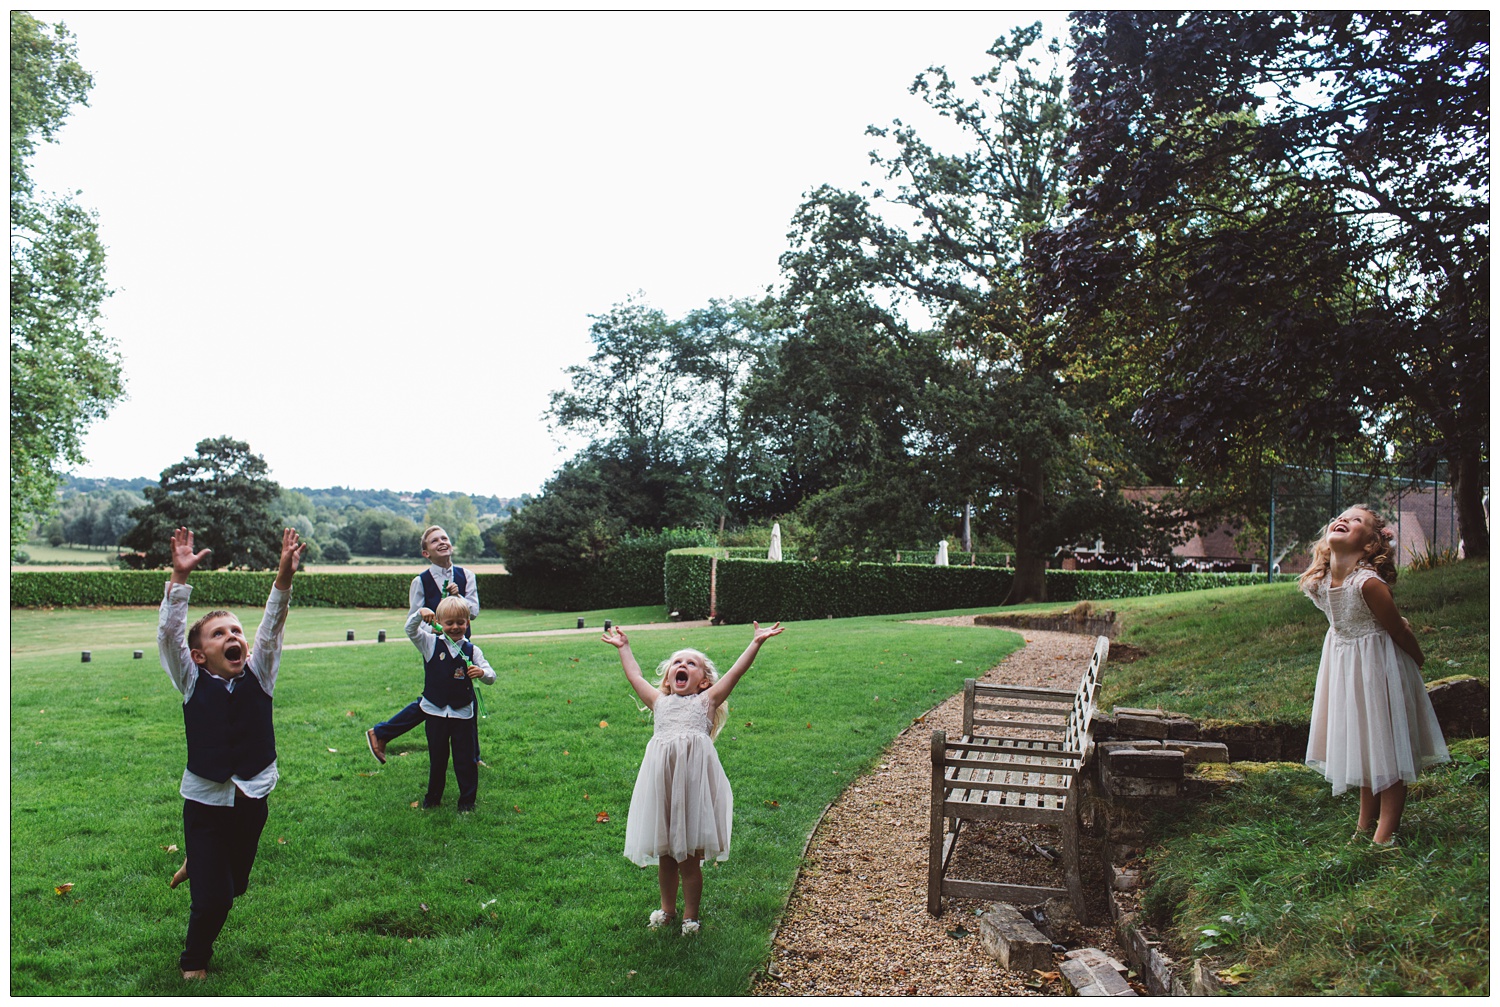 children looking up at the sky in the grounds of Maison Talbooth at a wedding